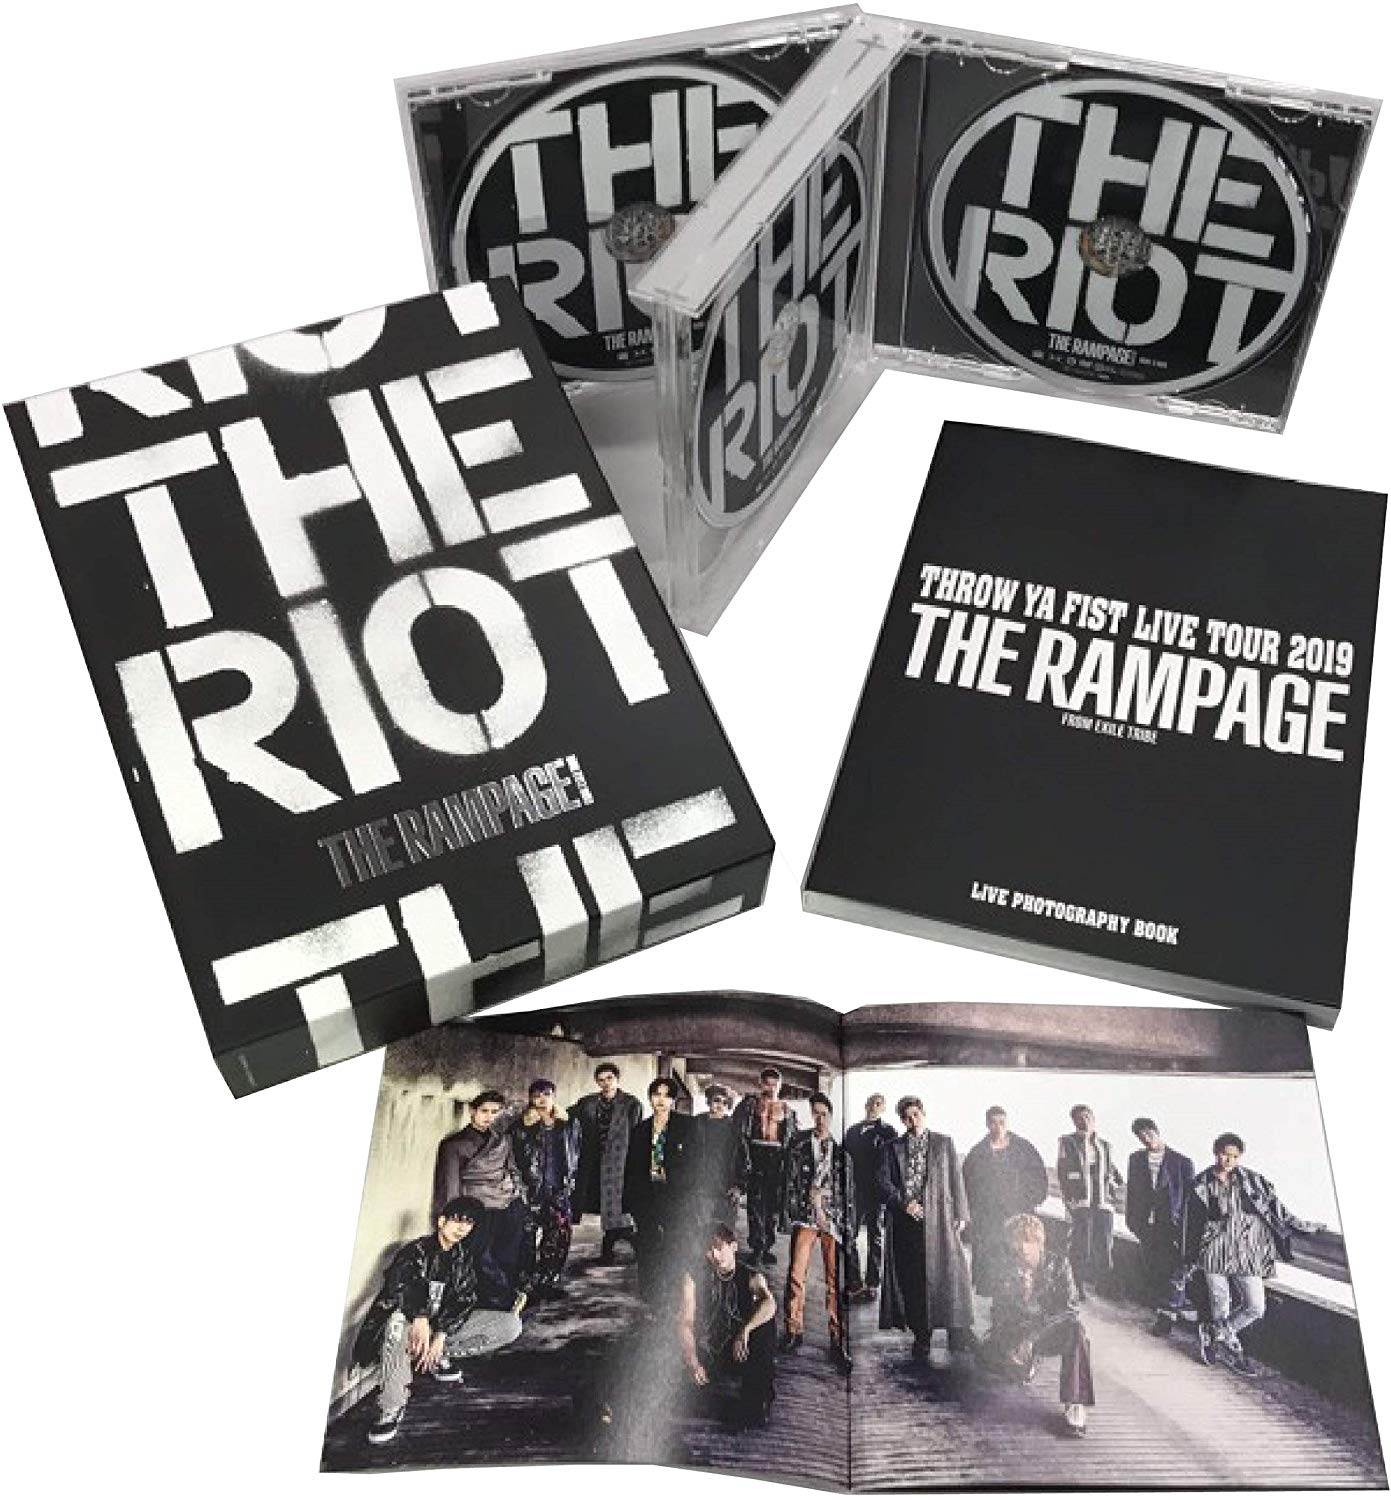 THE RAMPAGE FROM EXILE TRIBE - ミュージシャン